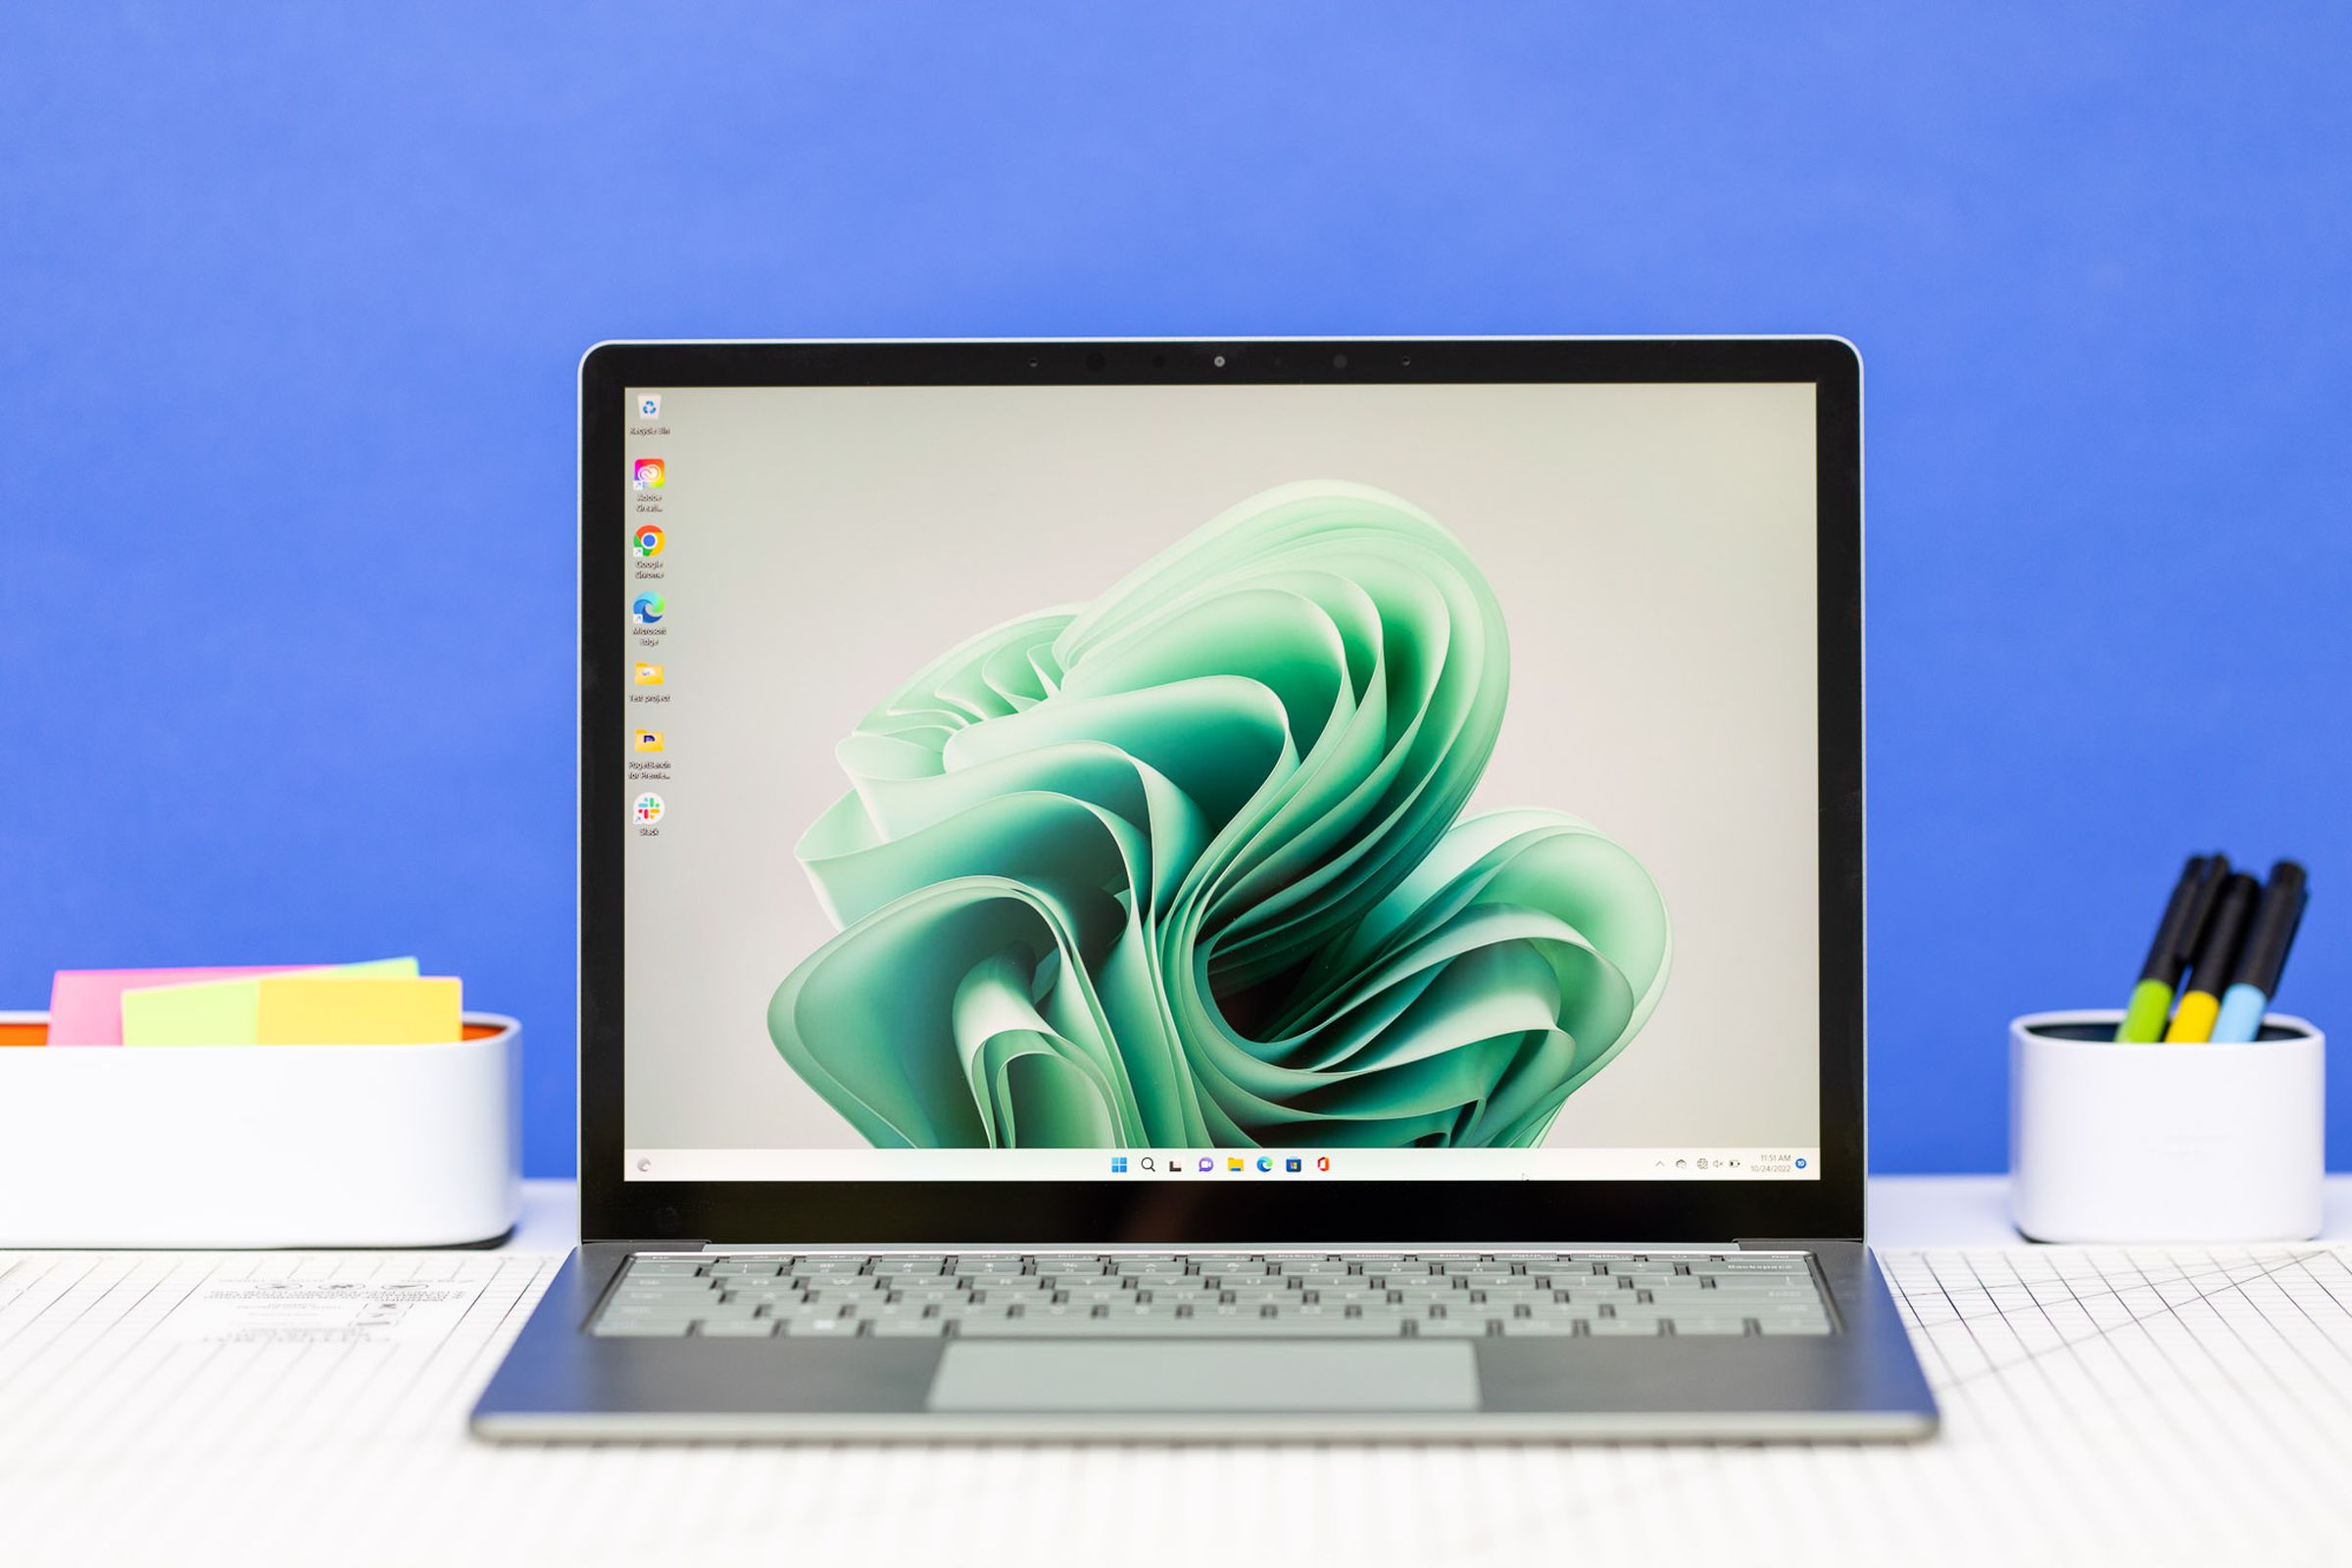 The Microsoft Surface Laptop 5 open on an office table. The screen displays a green ribbon.